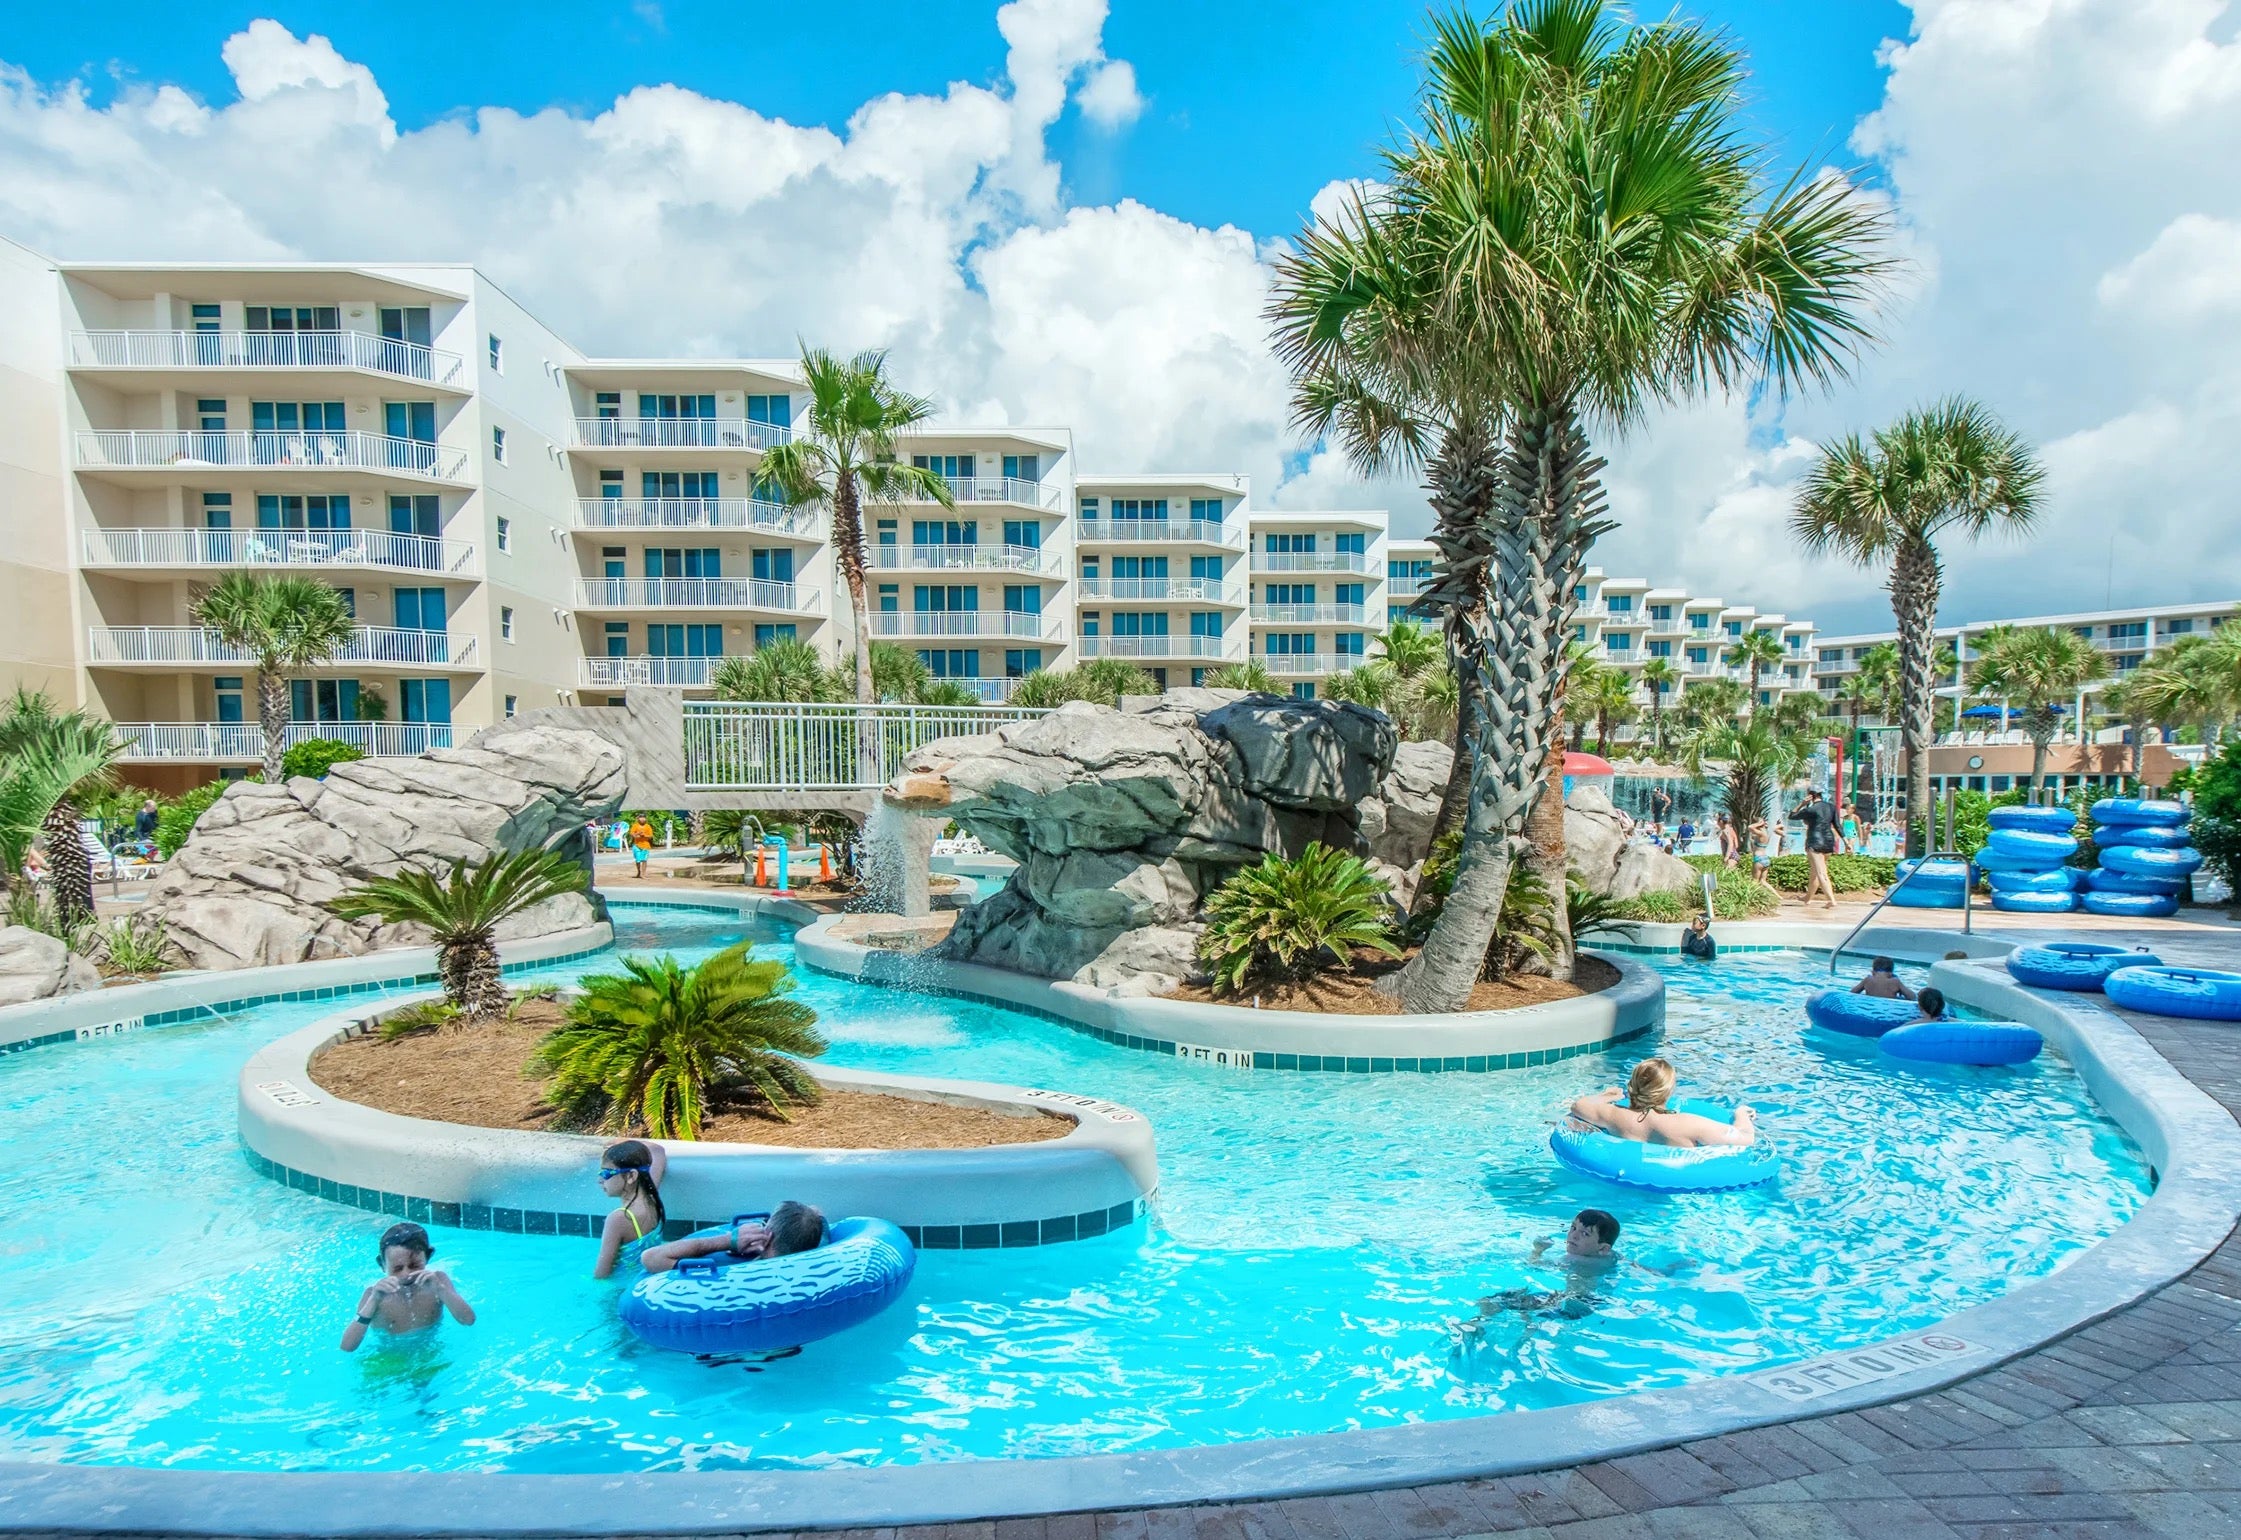 Who doesn't love floating on a lazy river? 